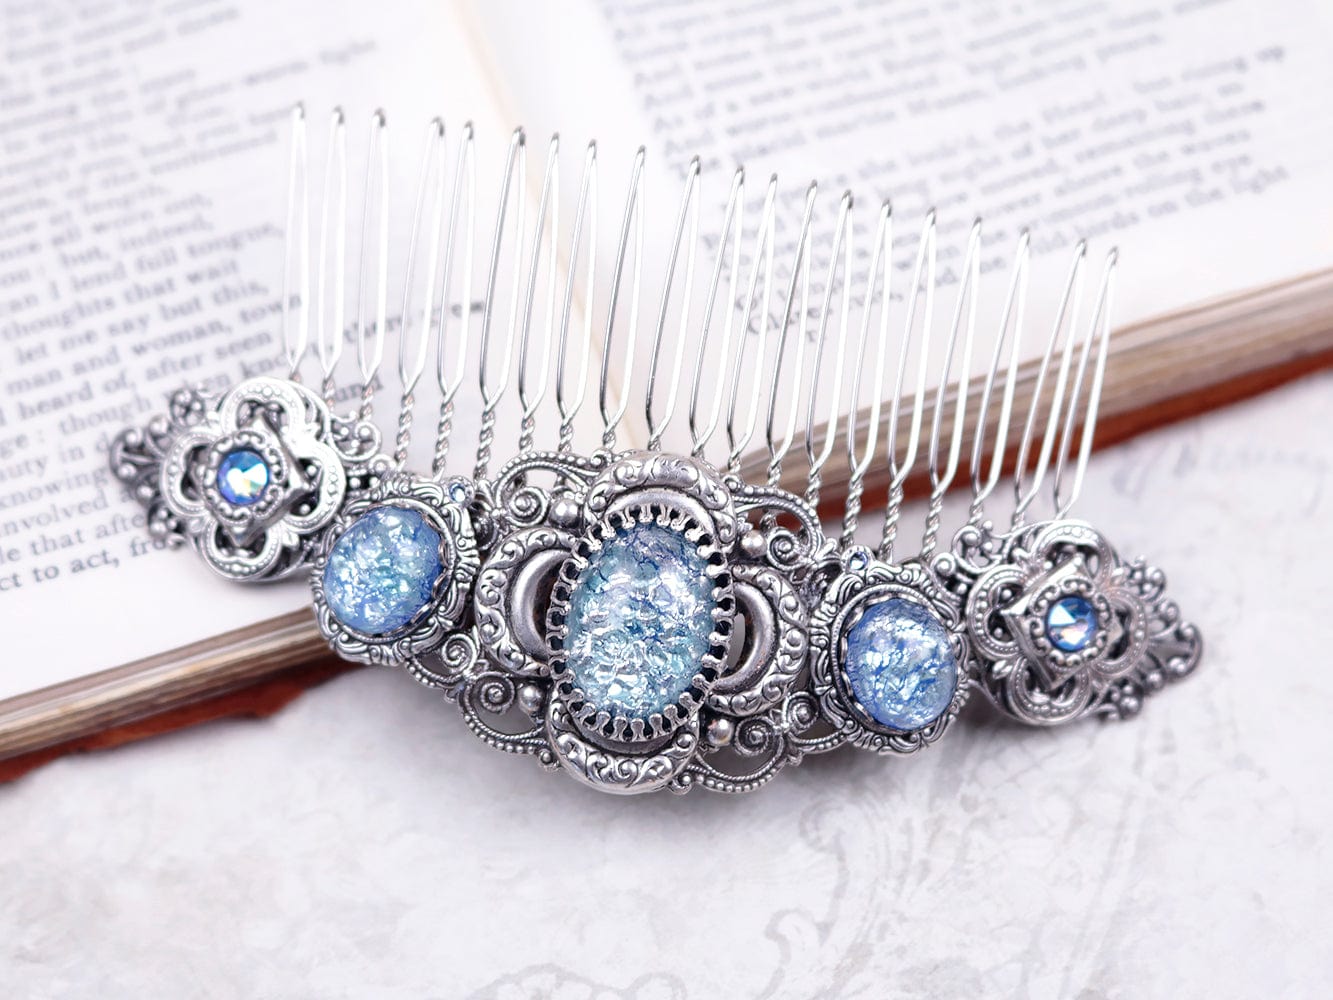 Canterbury Comb in Ice Blue Opal and Antiqued Silver by Rabbitwood and Reason